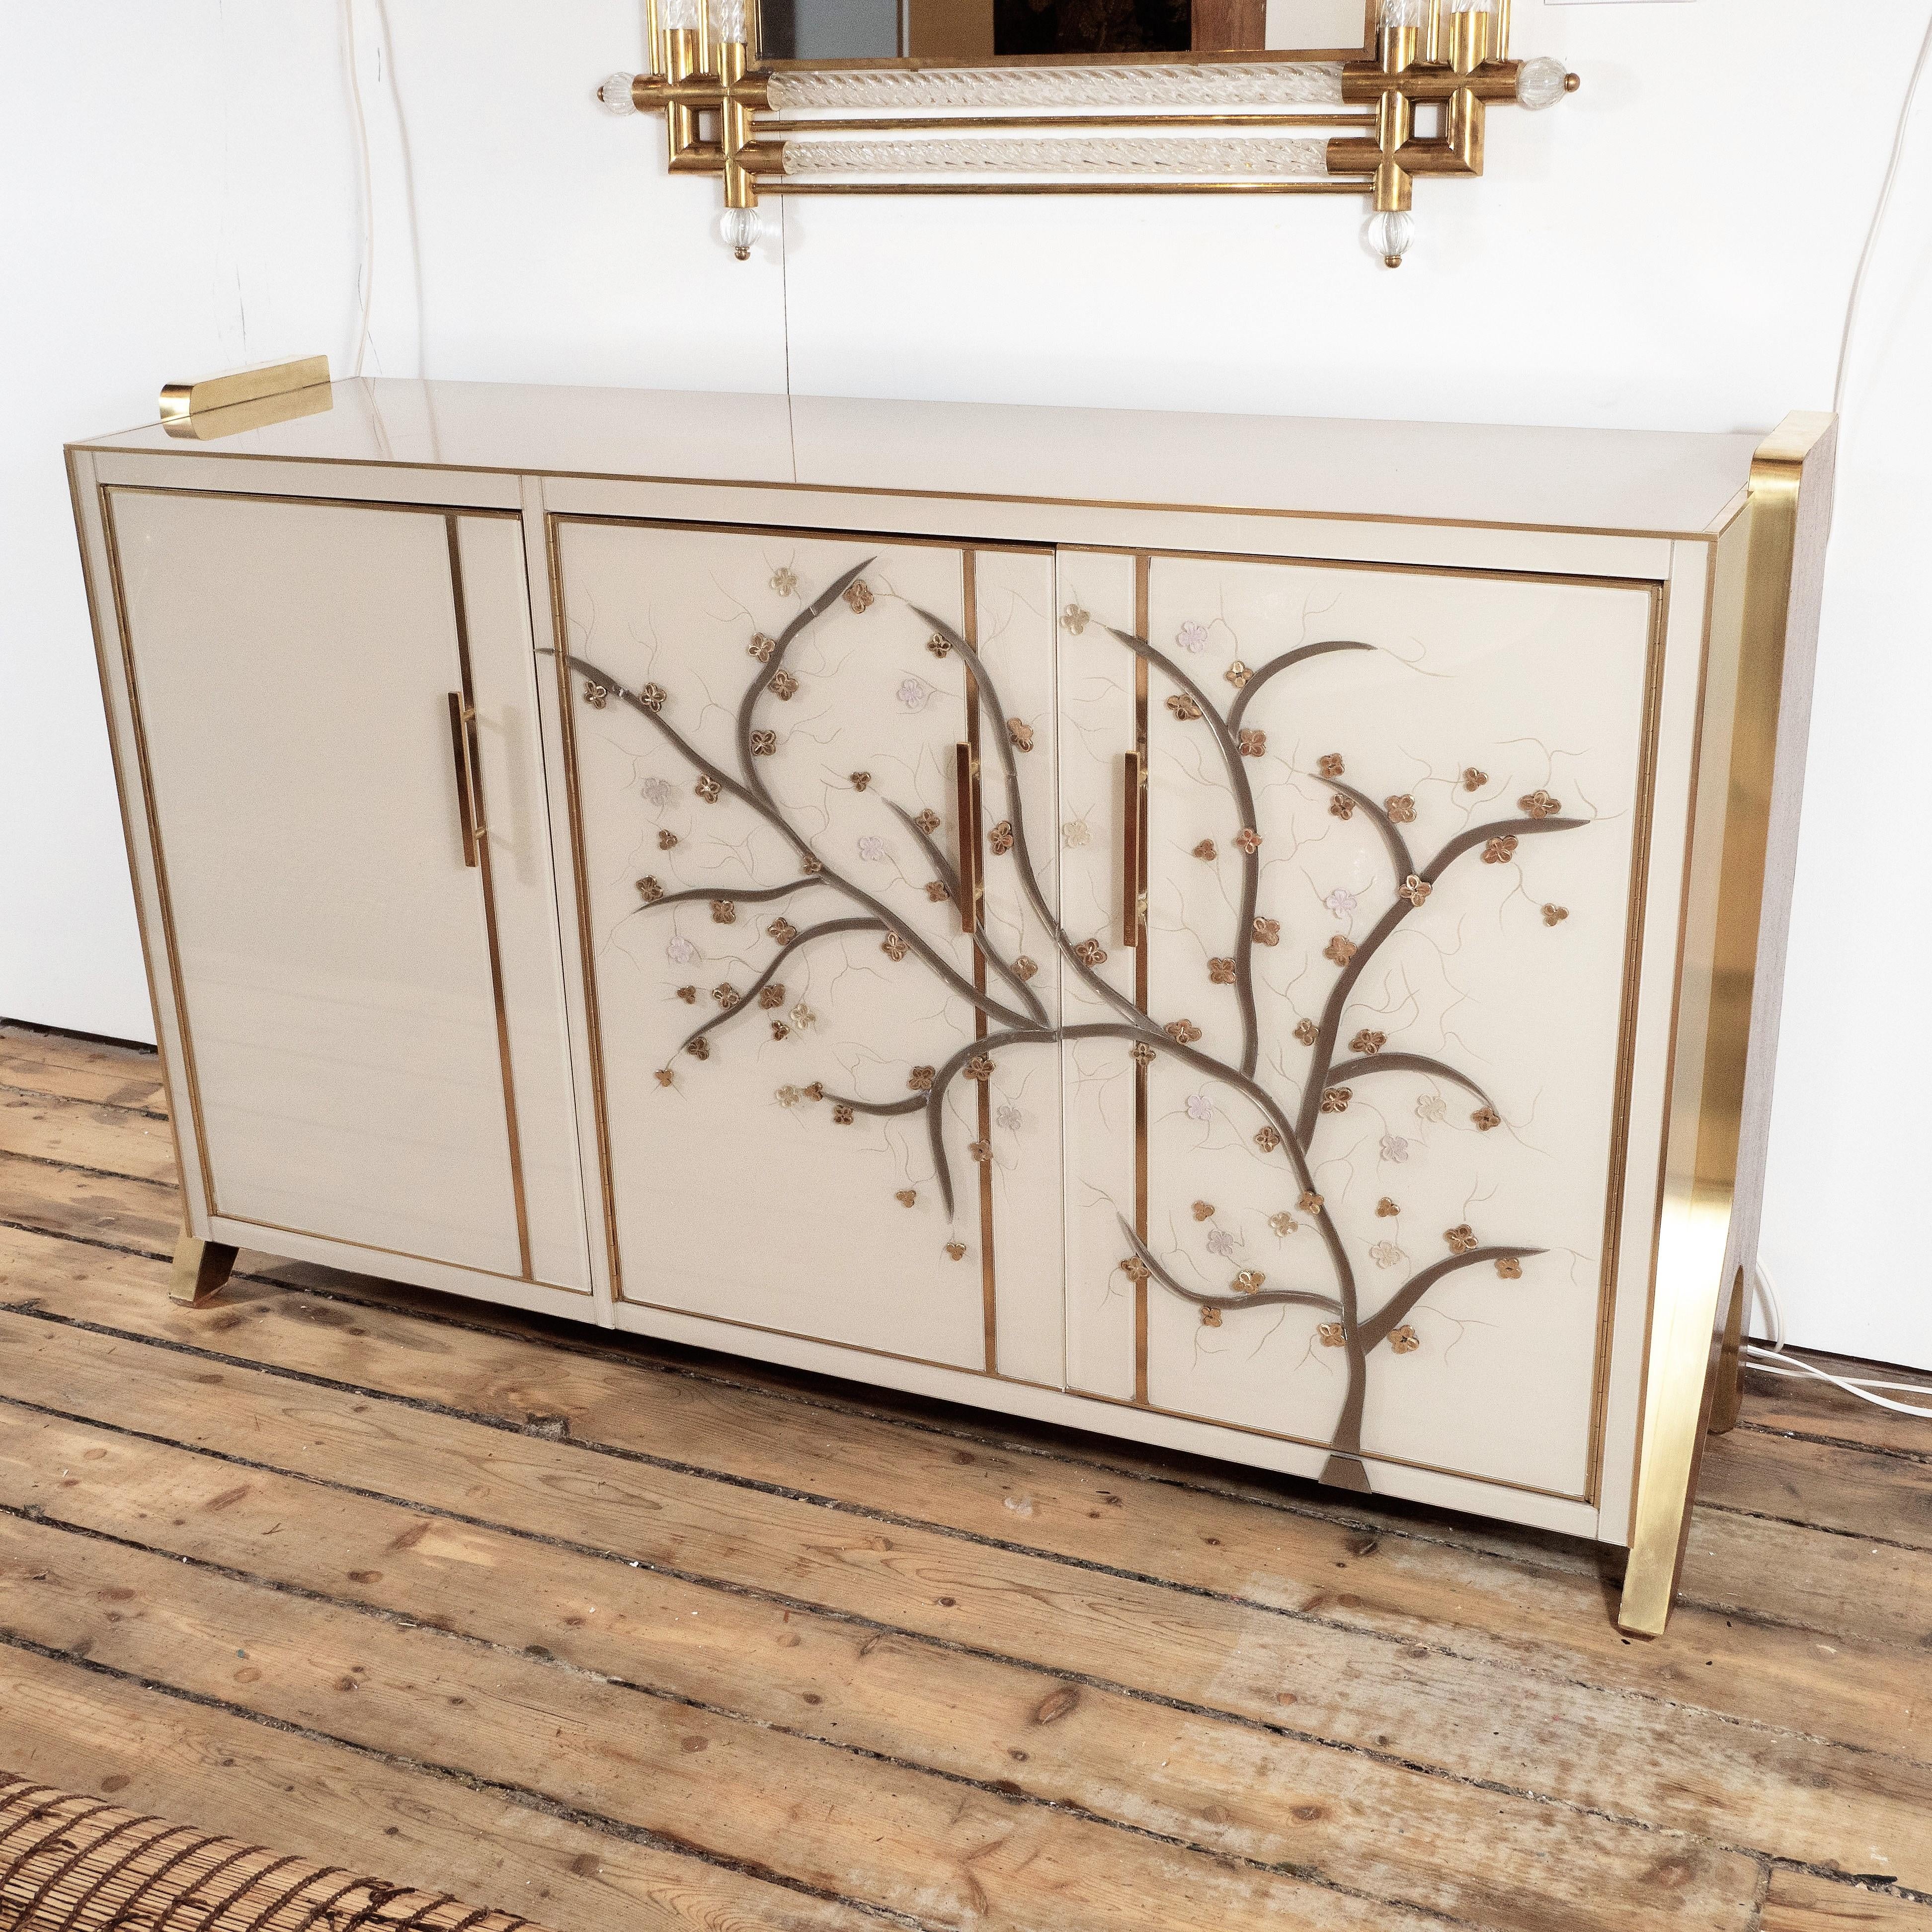 Brass Inlay and Ivory Murano Glass Flower Sideboard, Italy 2019, Pair Available (Handgefertigt)